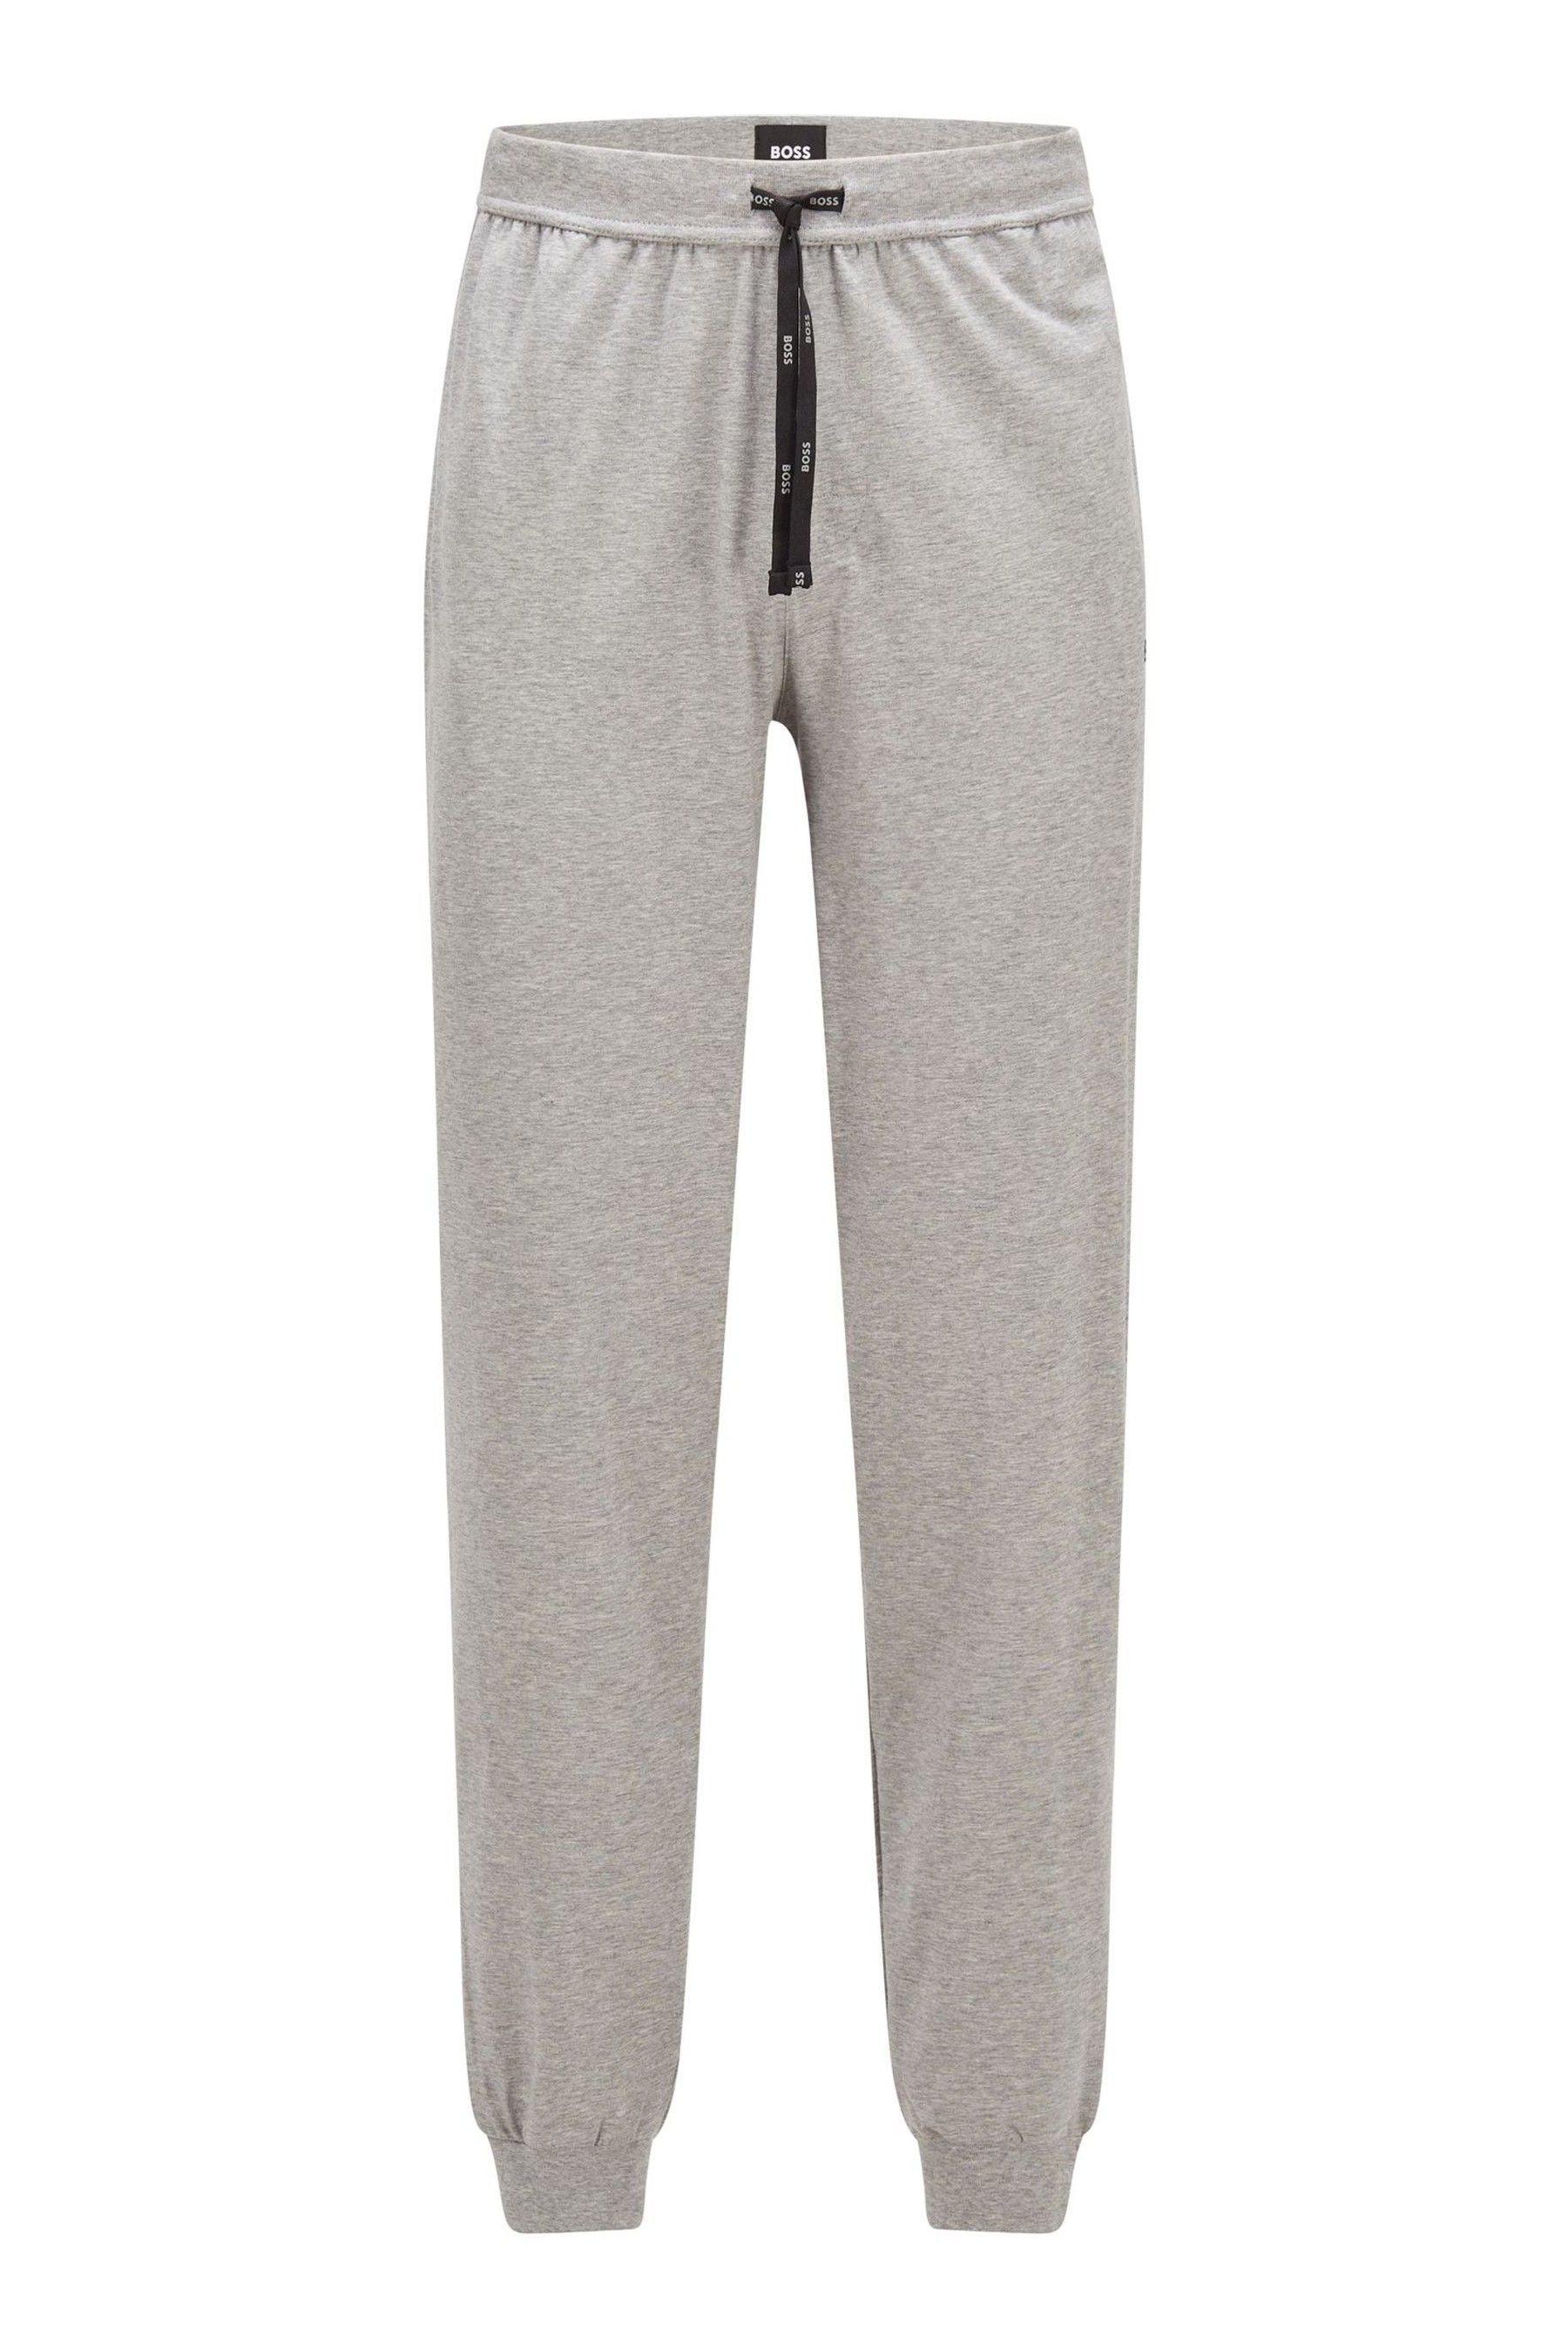 Buy BOSS Mix & Match Joggers from the Next UK online shop